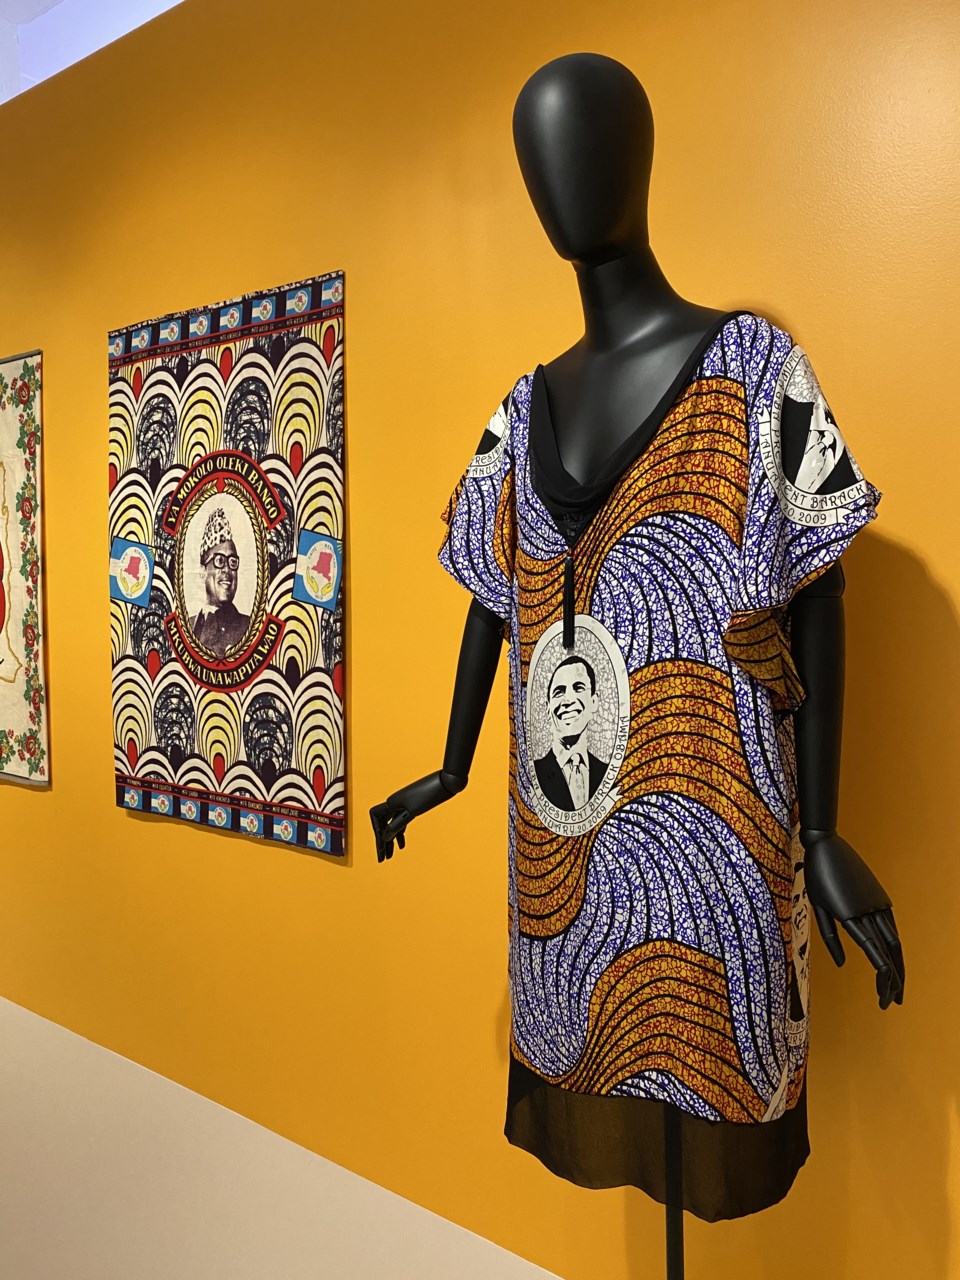 A New Exhibition at the Brooklyn Museum Explores Africa's